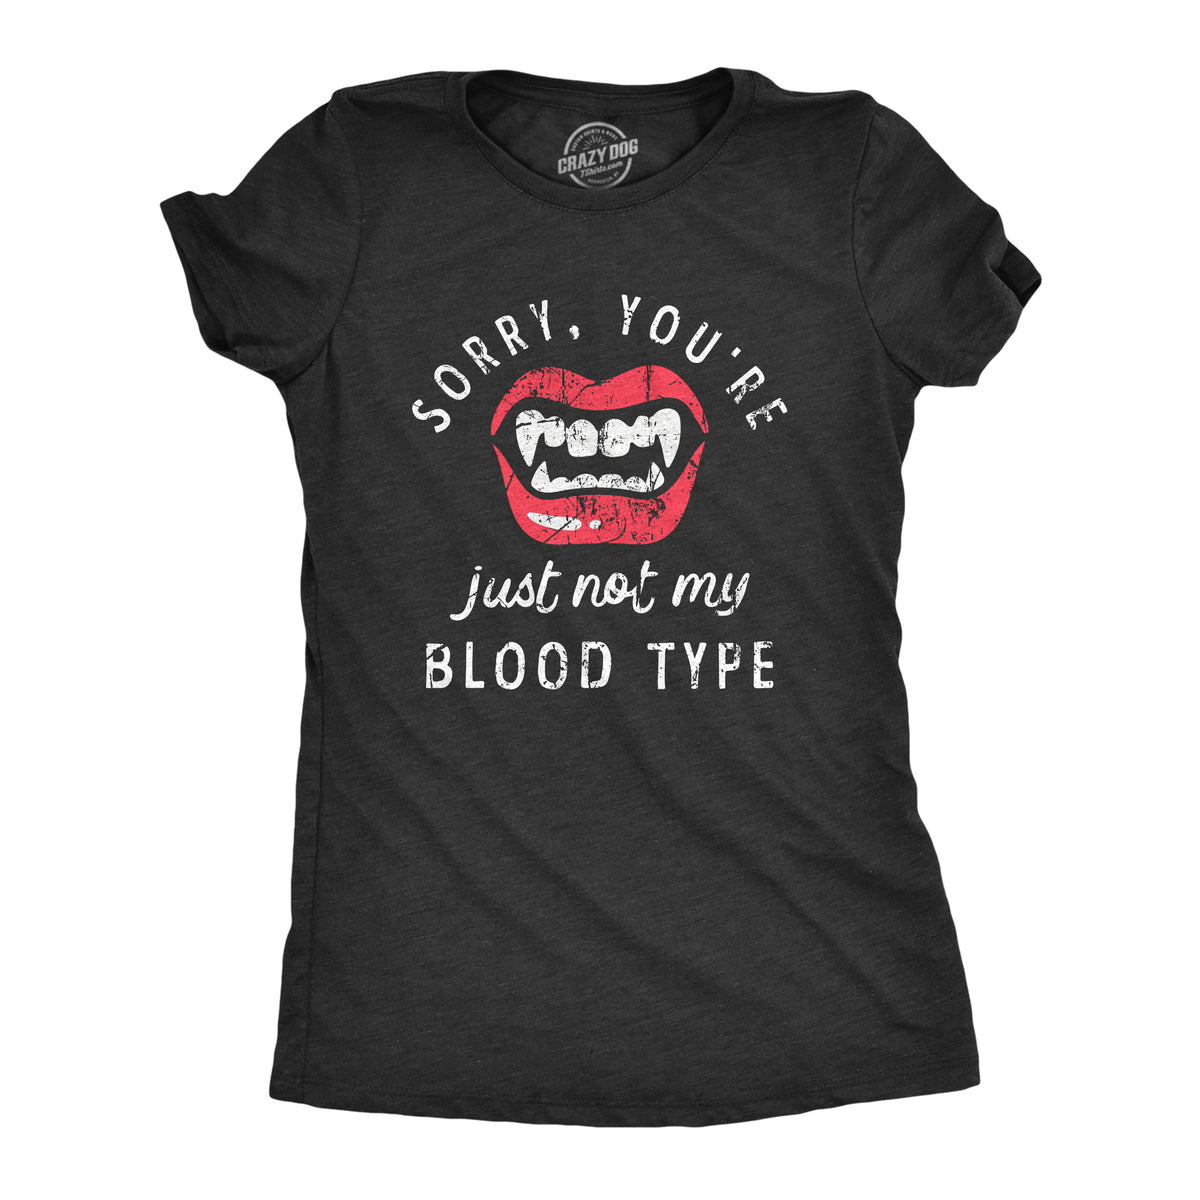 Funny Heather Black - BLOOD Sorry Youre Just Not My Blood Type Womens T Shirt Nerdy Halloween Tee